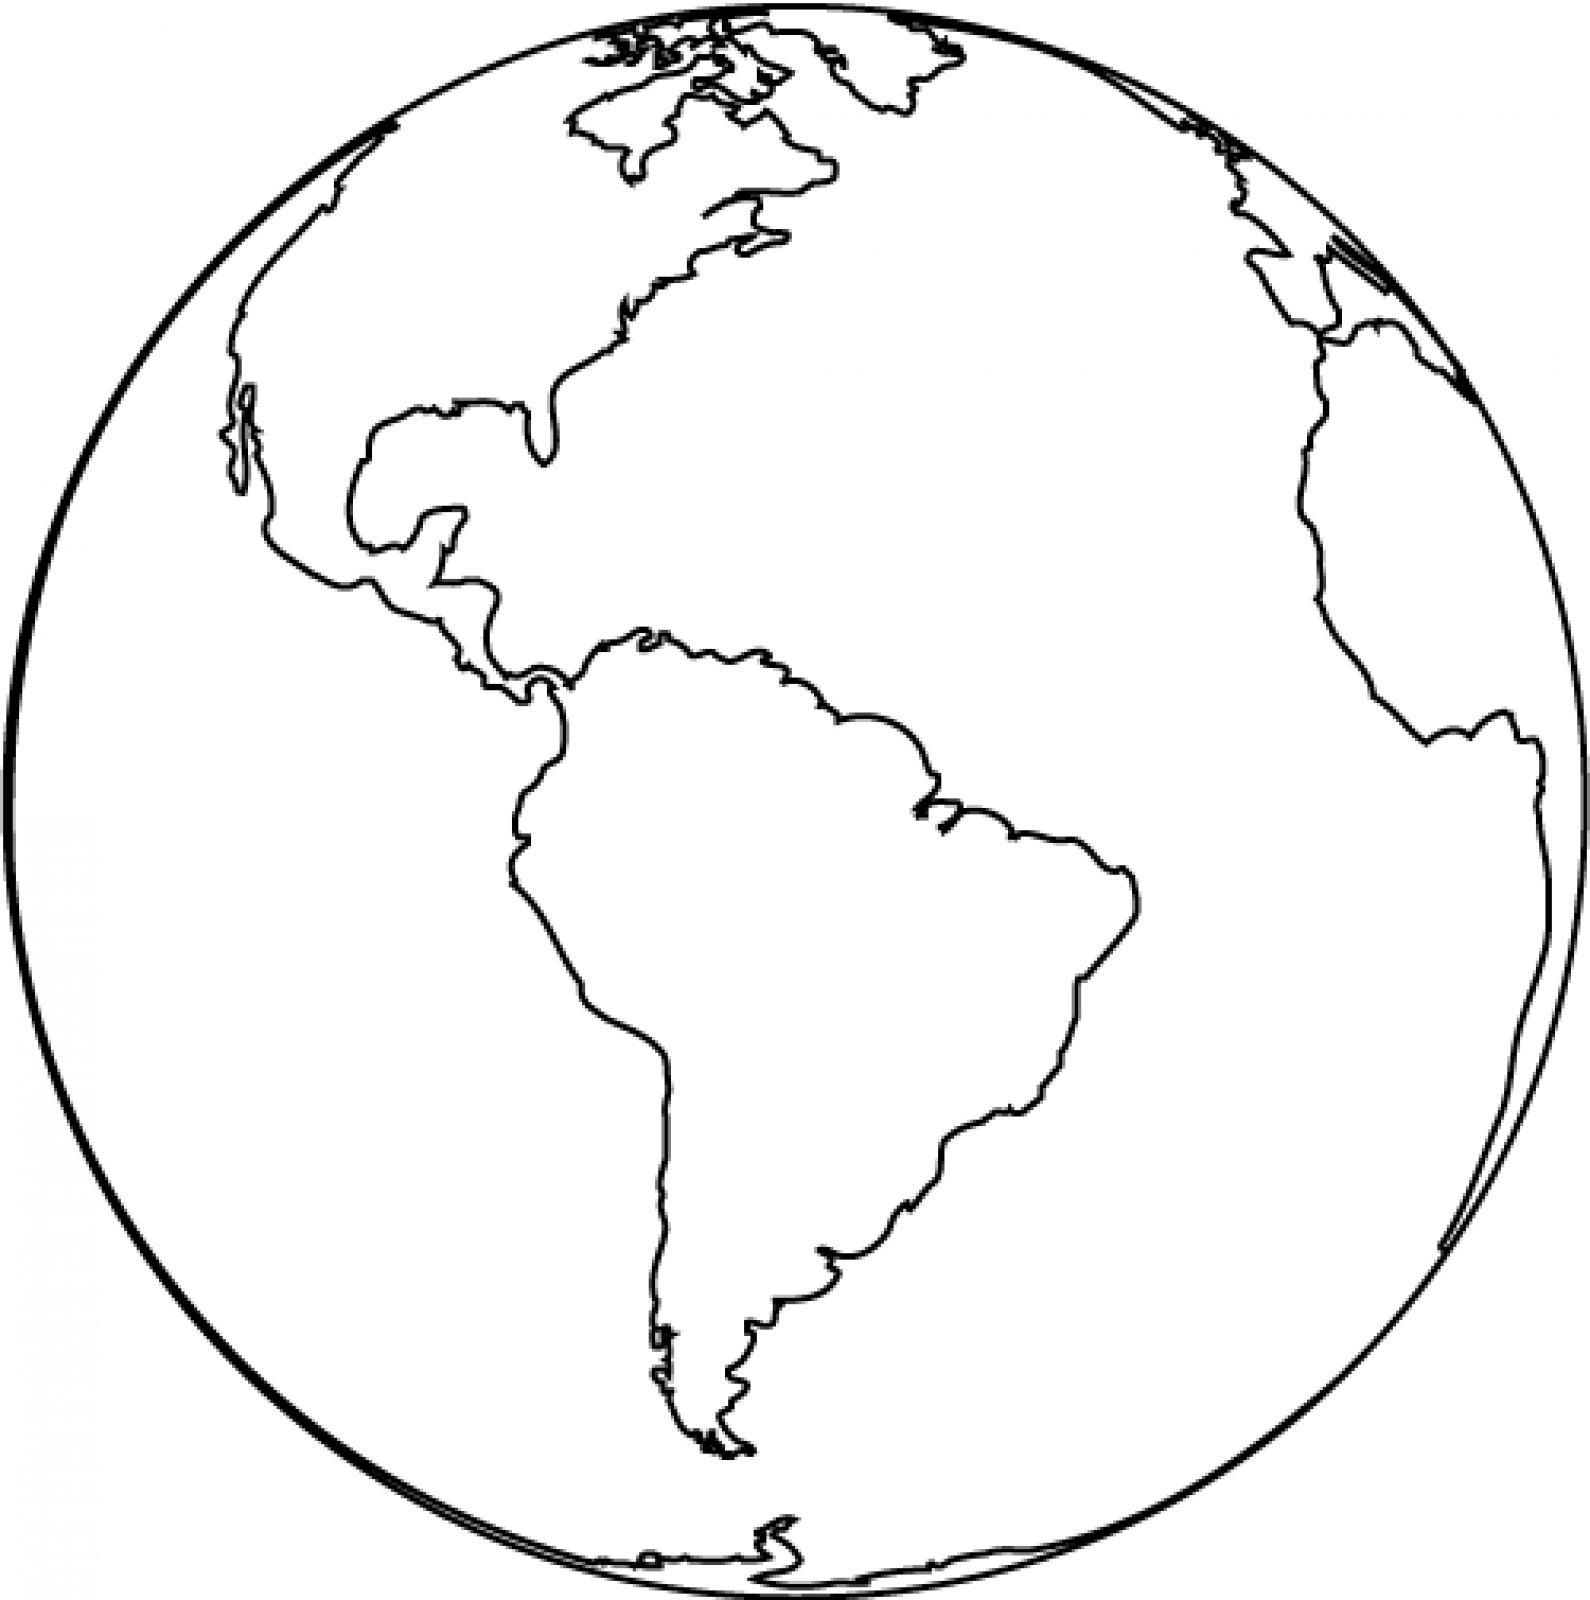 World Map Coloring Page Coloring Pages World Coloring Pages ...